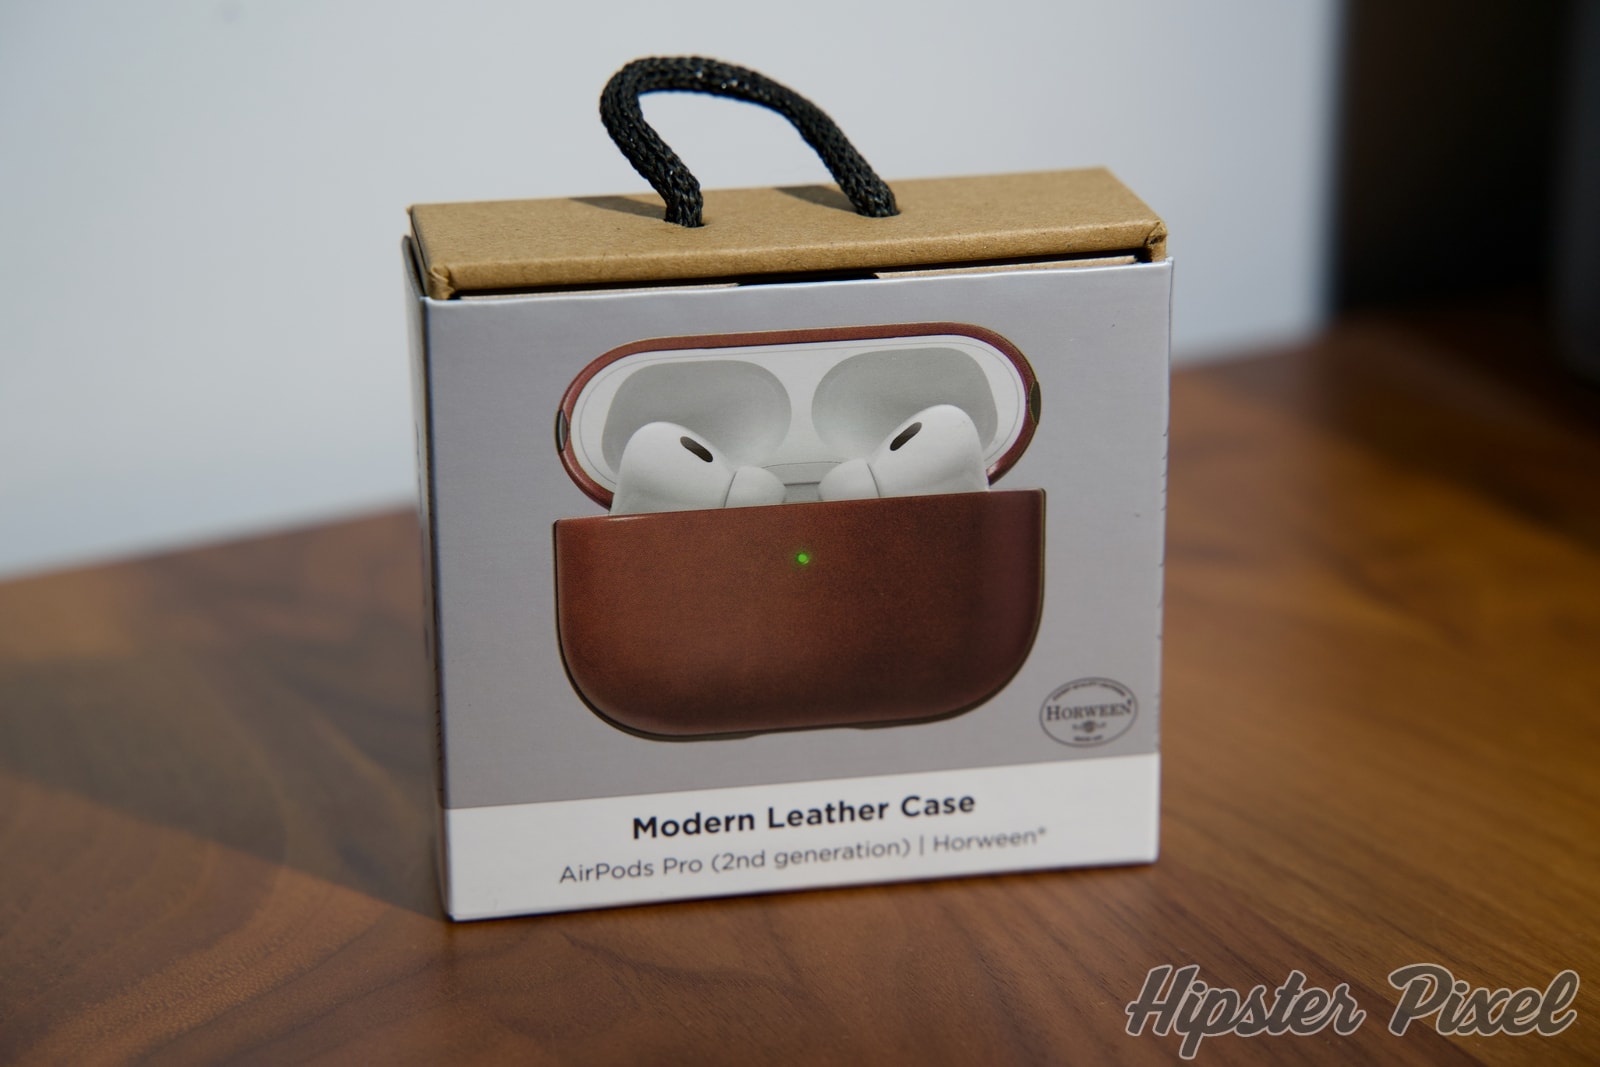 Nomad Modern Horween Leather Case for AirPods Pro 2nd Generation [Review]